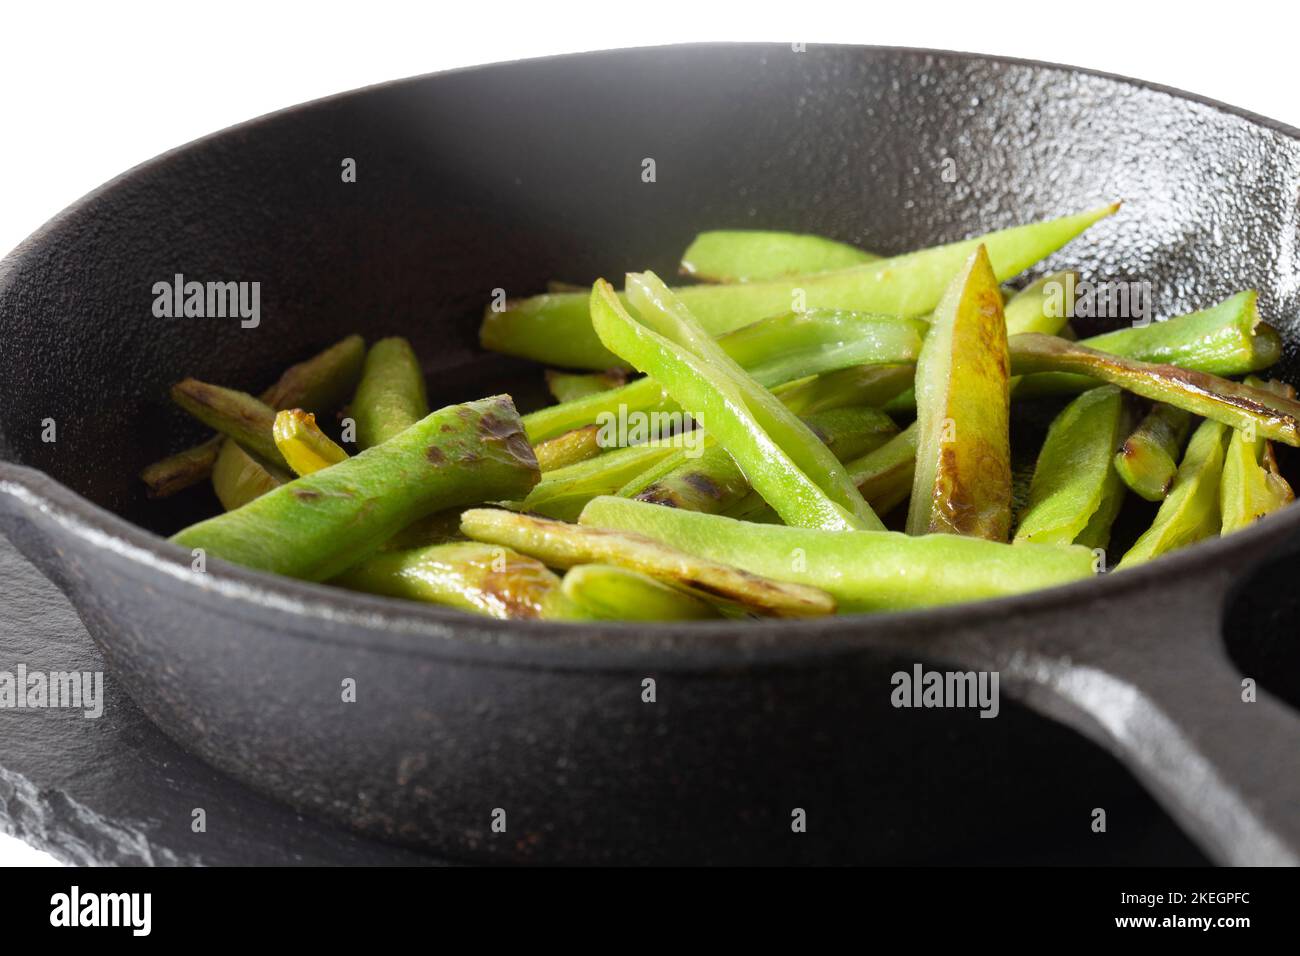 Green beans fried, in a cast iron frying pan wiyth olive oil, on a slate board. Isolated on a white background Stock Photo